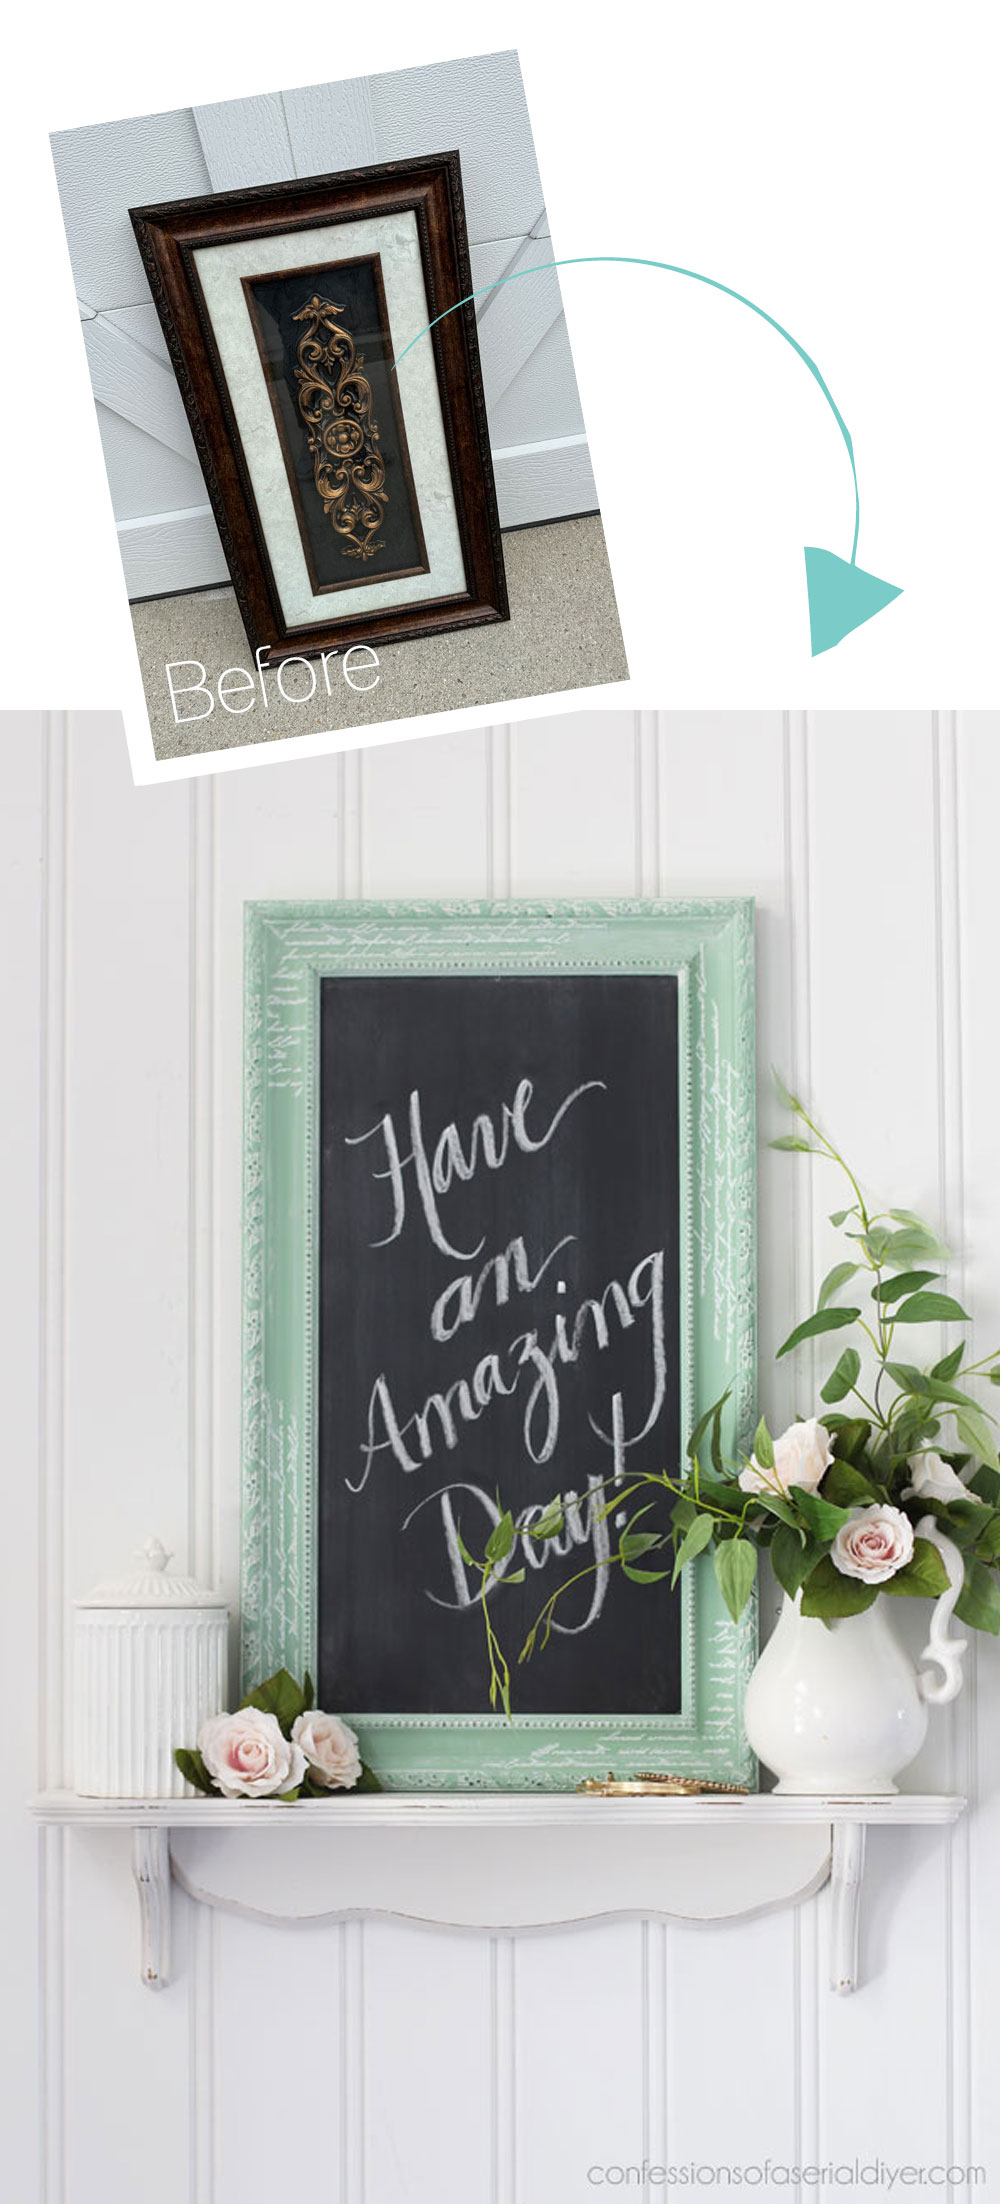 Fun with Cheap Frames and How to Make a Chalkboard